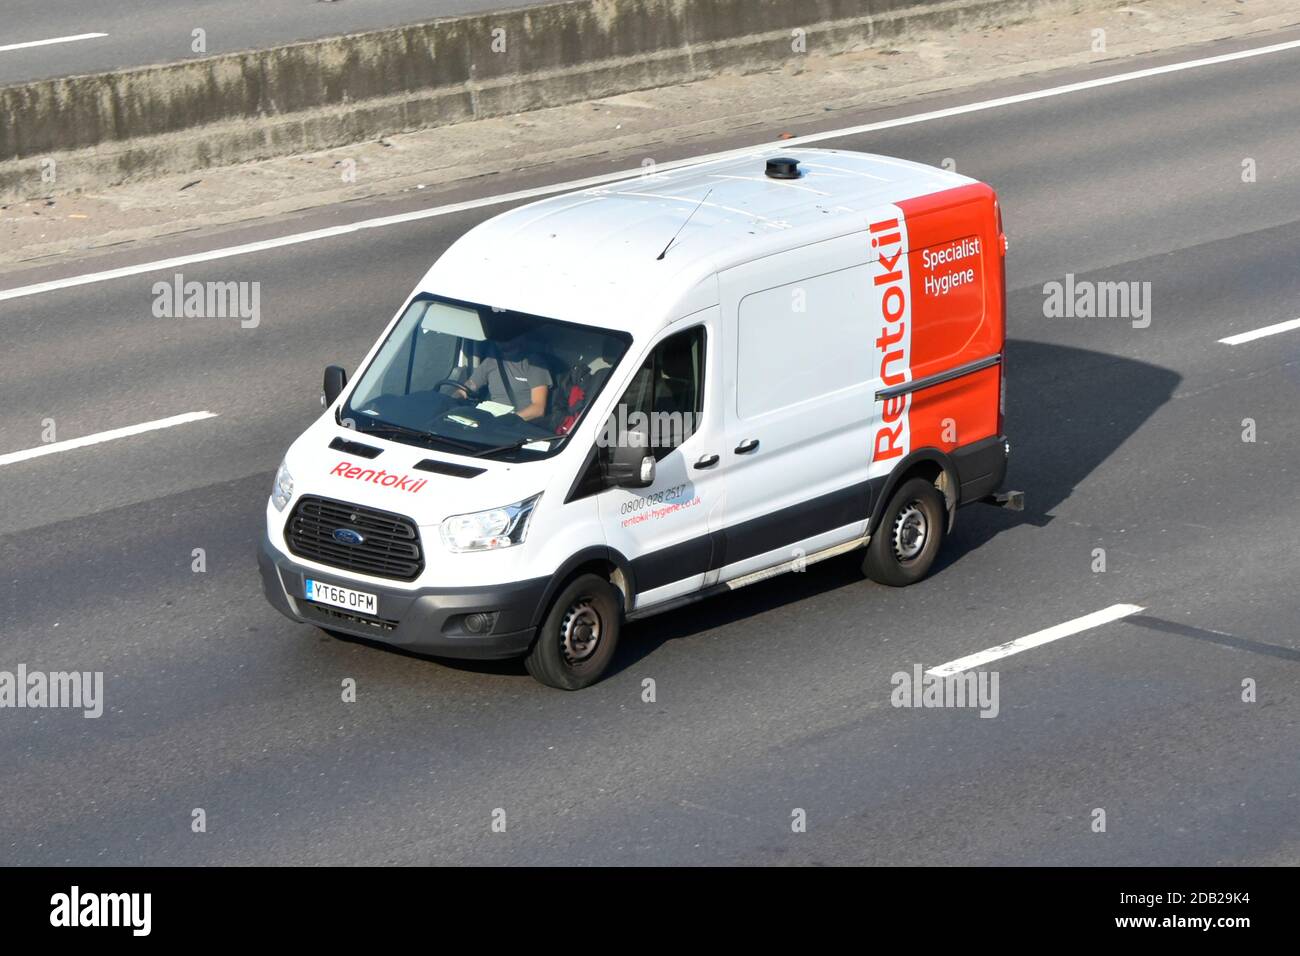 Aerial looking down from above at front & side view of Rentokil Specialist Hygiene business services van & driver travelling on motorway England UK Stock Photo